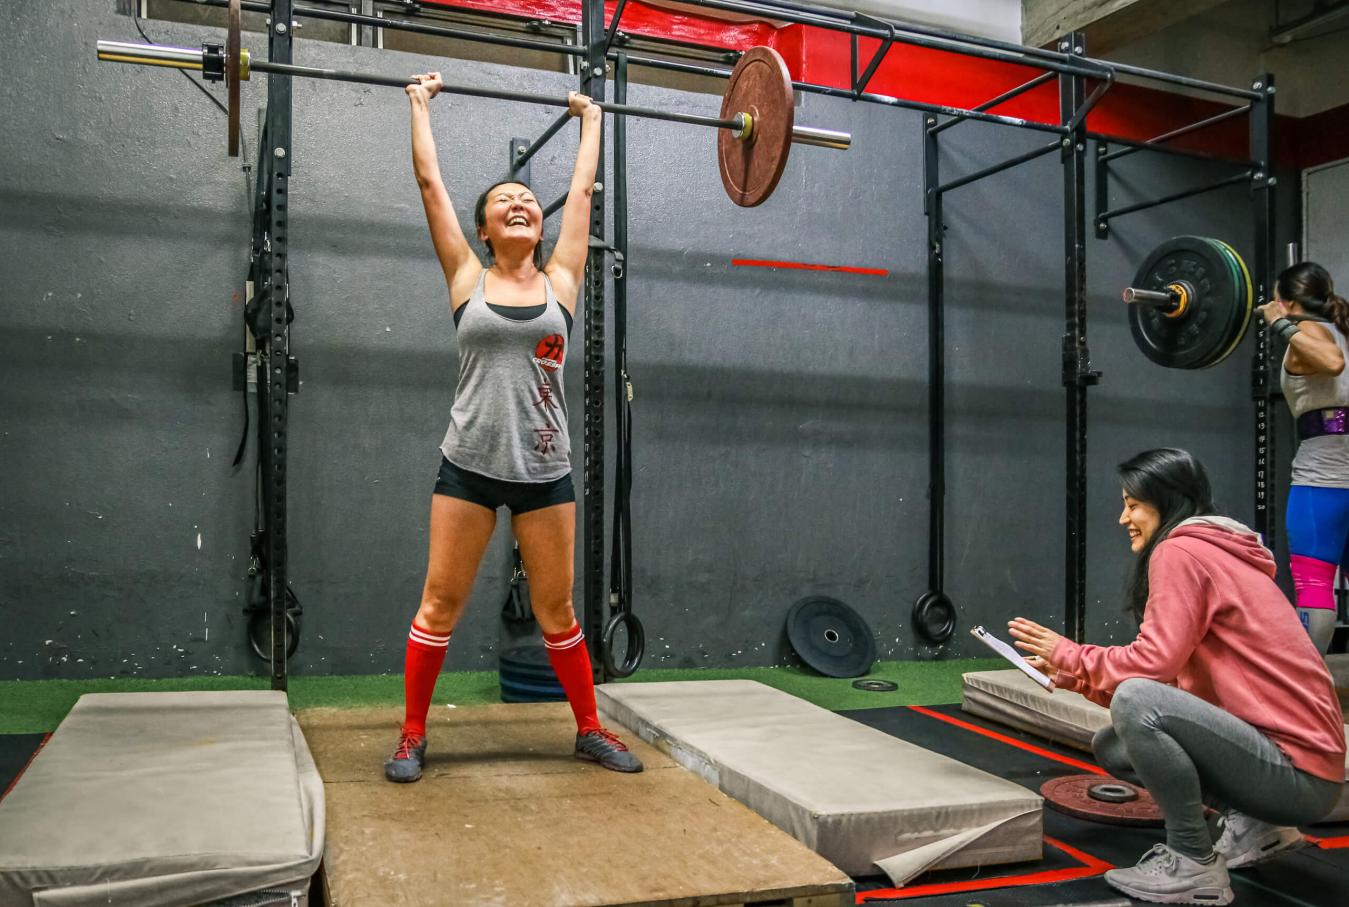 Member celebrates with barbell overhead during CrossFit Open